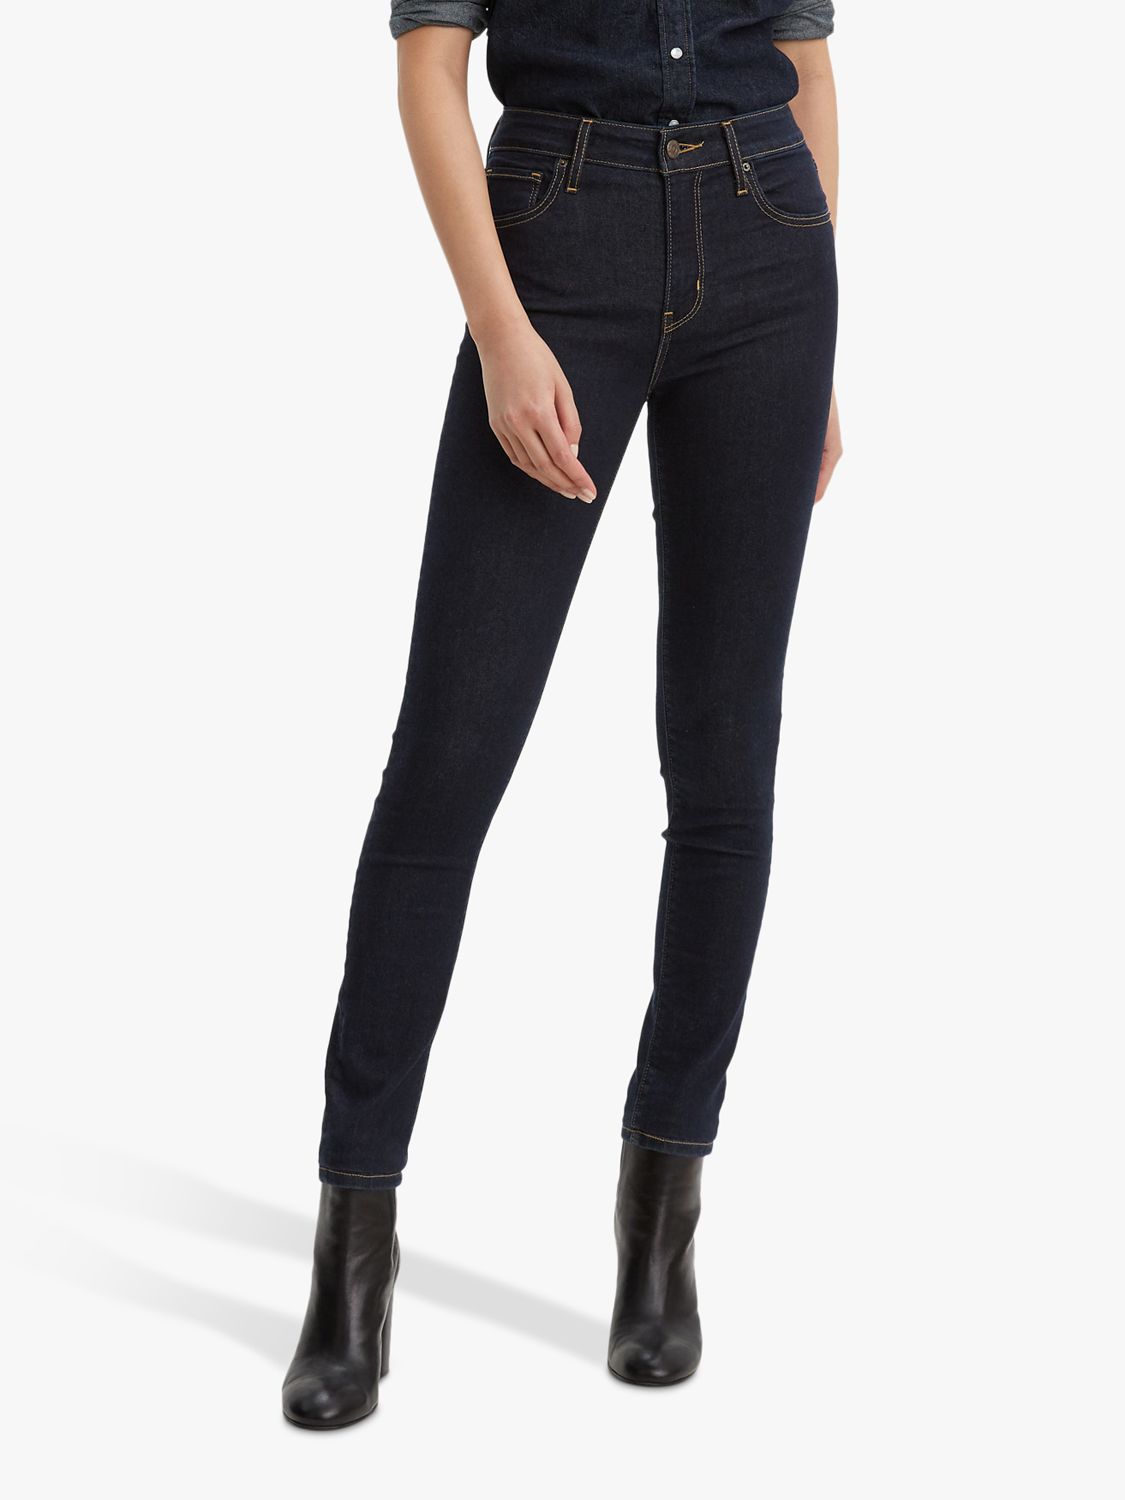 slot inflation tyktflydende Levi's 721 High Rise Skinny Jeans, To The Nine at John Lewis & Partners